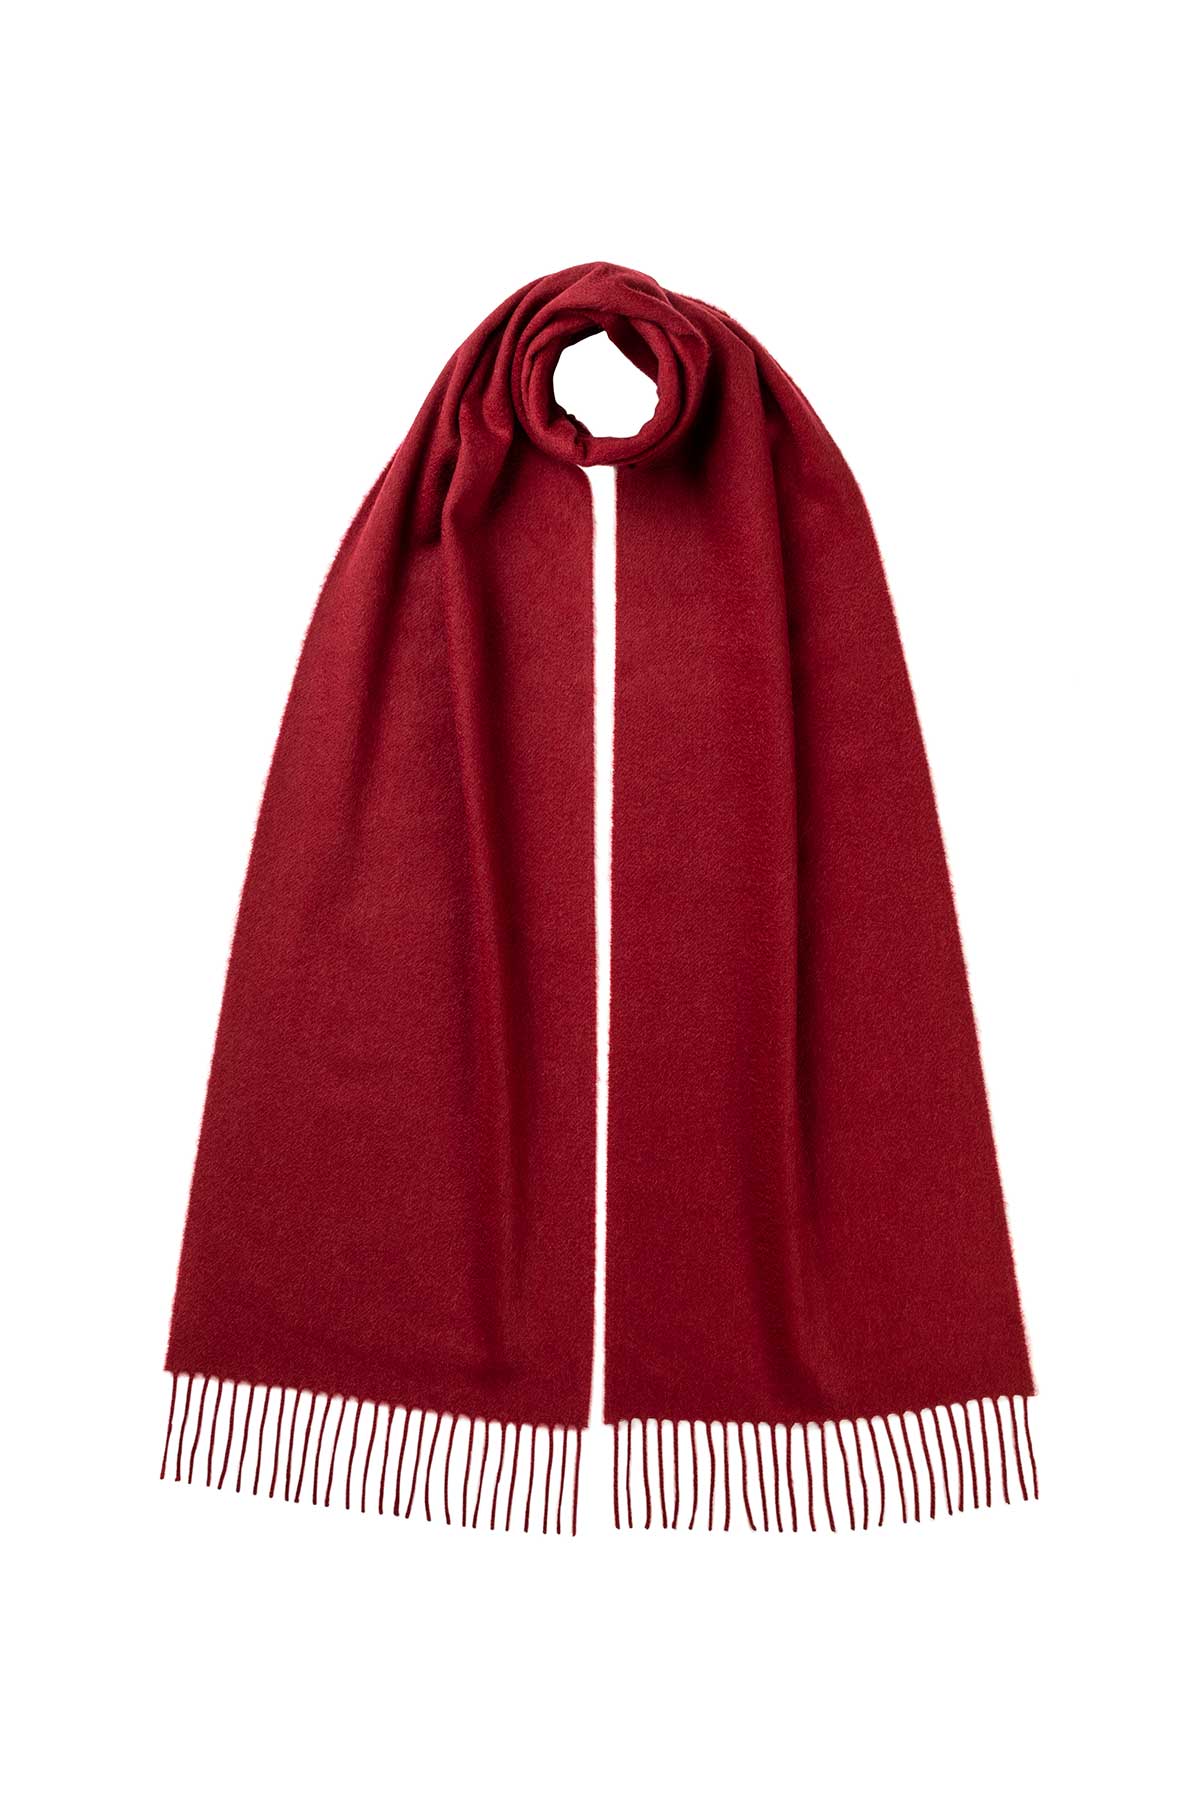 Johnstons of Elgin Cashmere Scarf in Merlot on a white background WA000016SE7234N/A